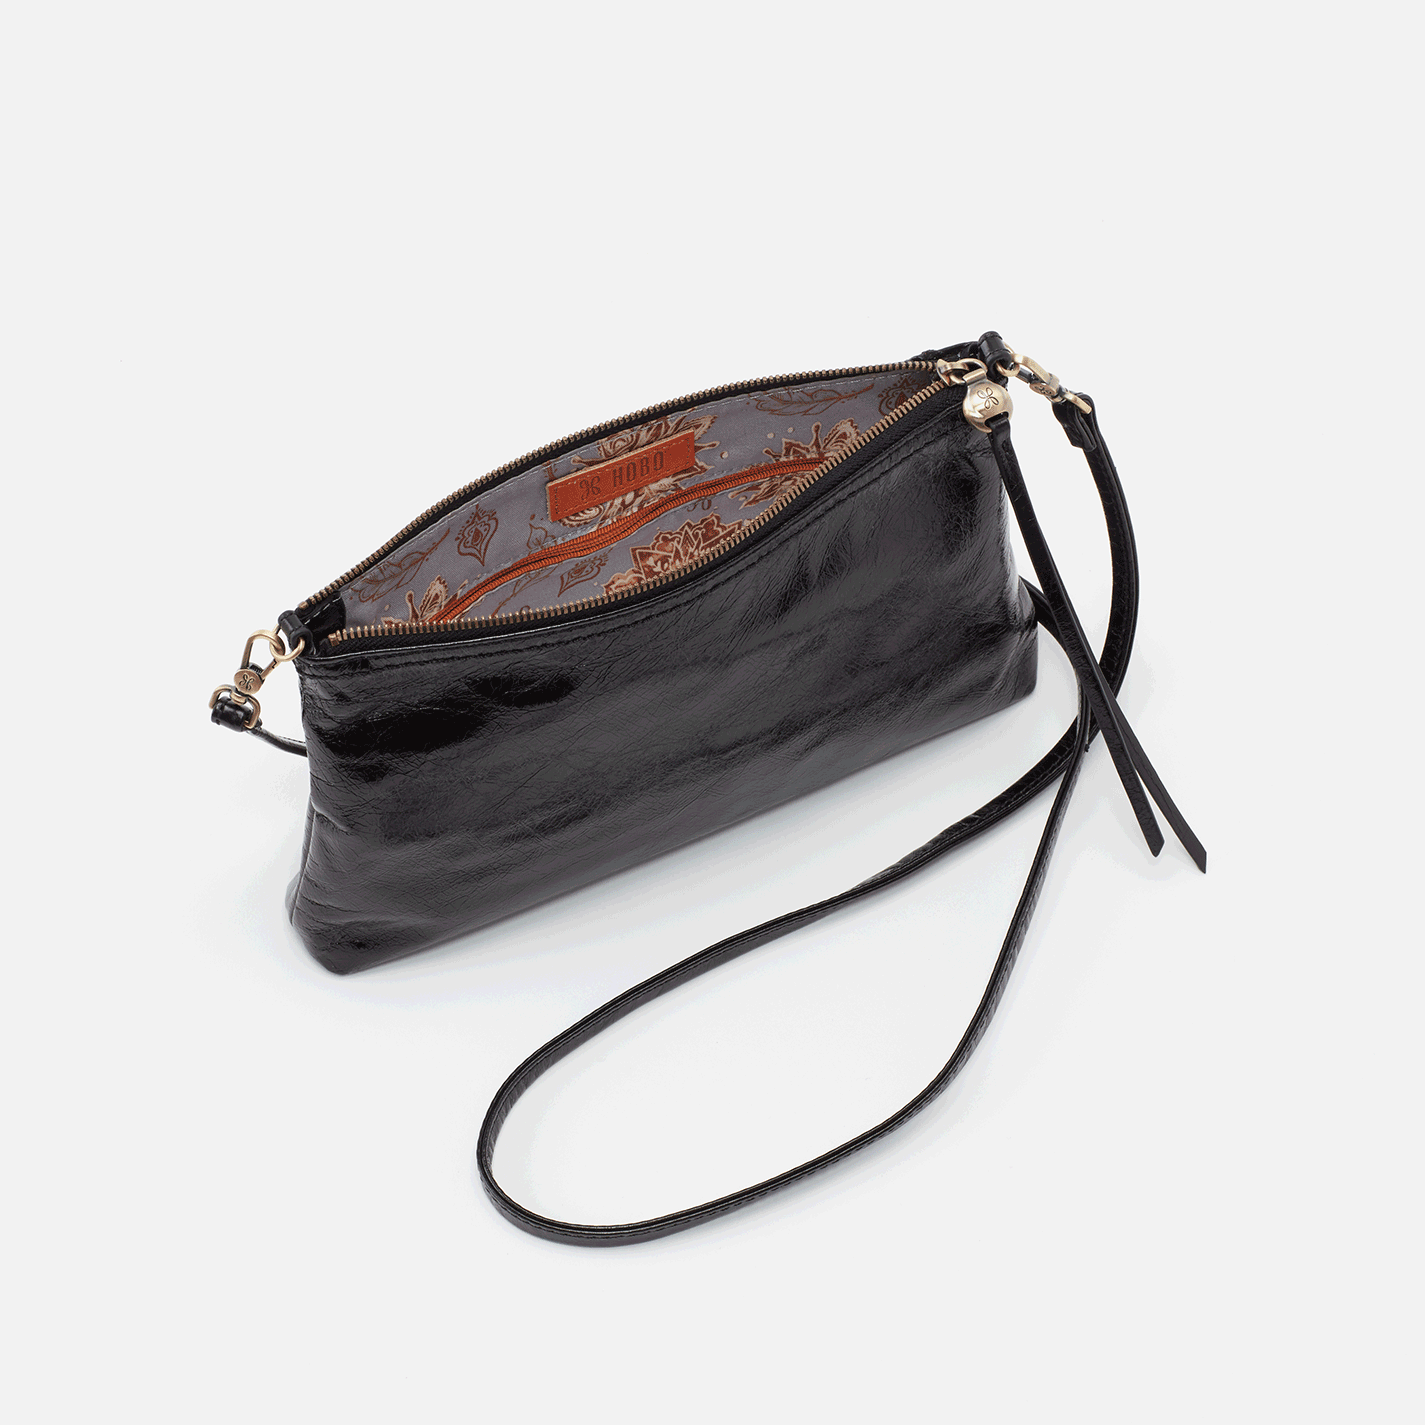 Darcy Black leather convertible bag can be worn three ways: crossbody, baguette bag and wristlet by HOBO. Available at The Painted Cottage in Edgewater, MD.